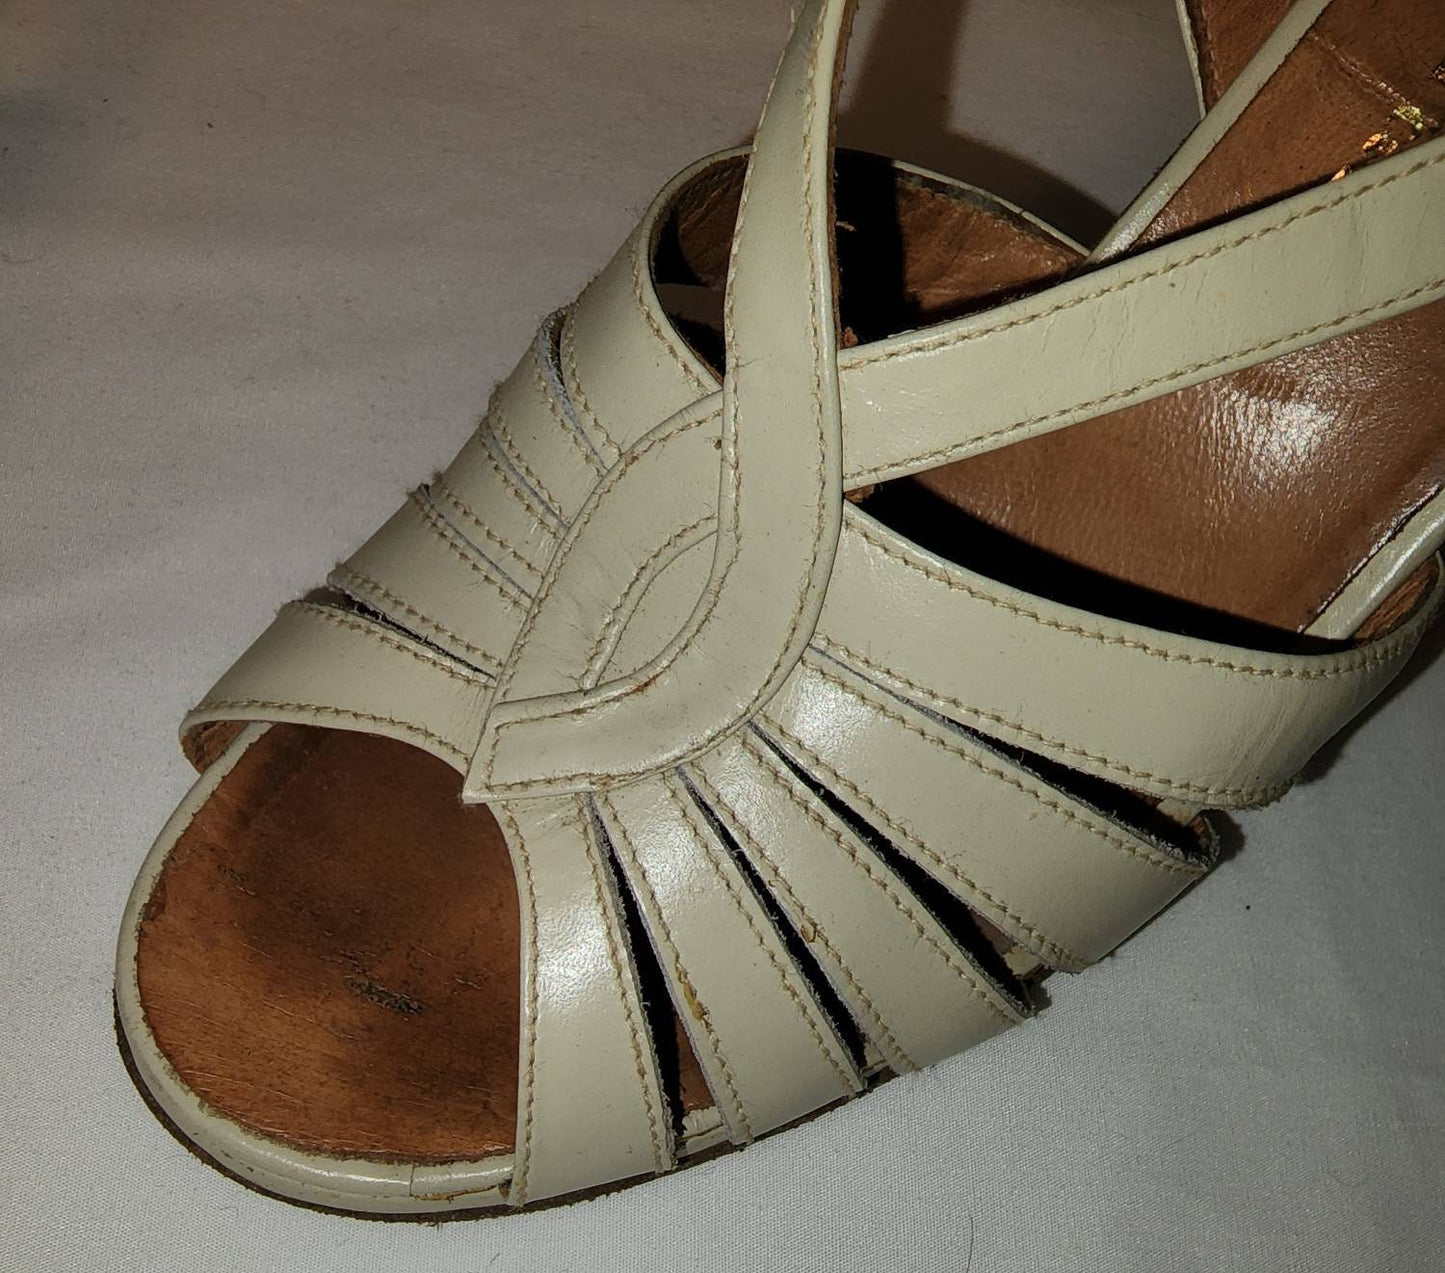 Vintage High Heel Sandals 1970s Strappy Beige Leather Heels Made in Italy 3.5 inch heels Quali Craft Boho